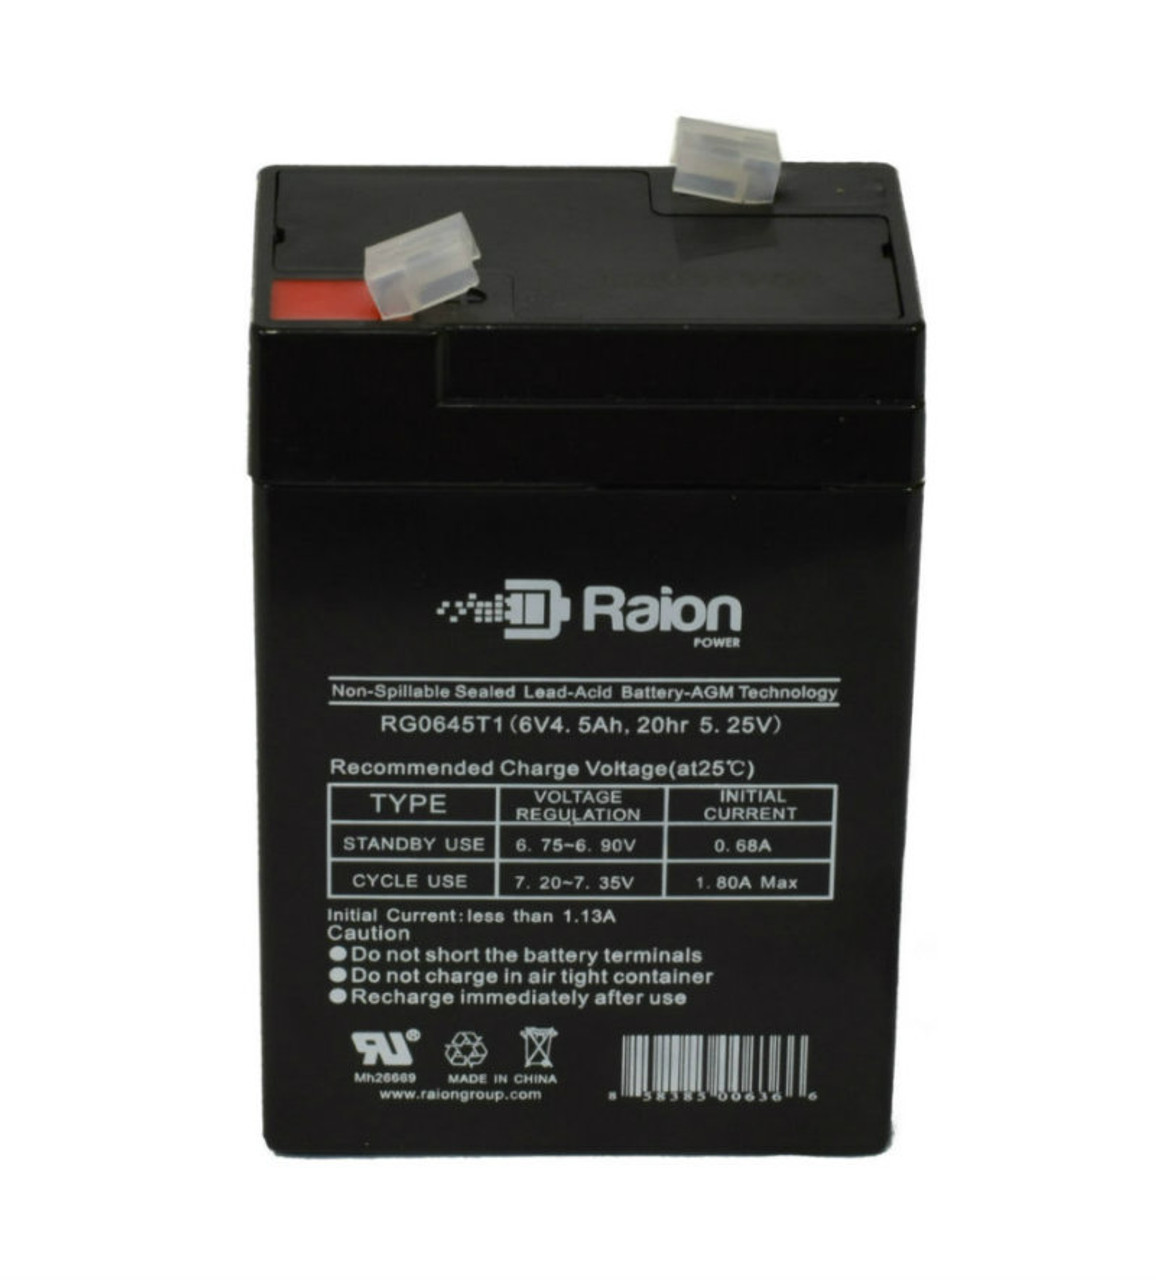 Raion Power RG0645T1 Replacement Battery Cartridge for Criticare Systems 502 Pulse Oximeter